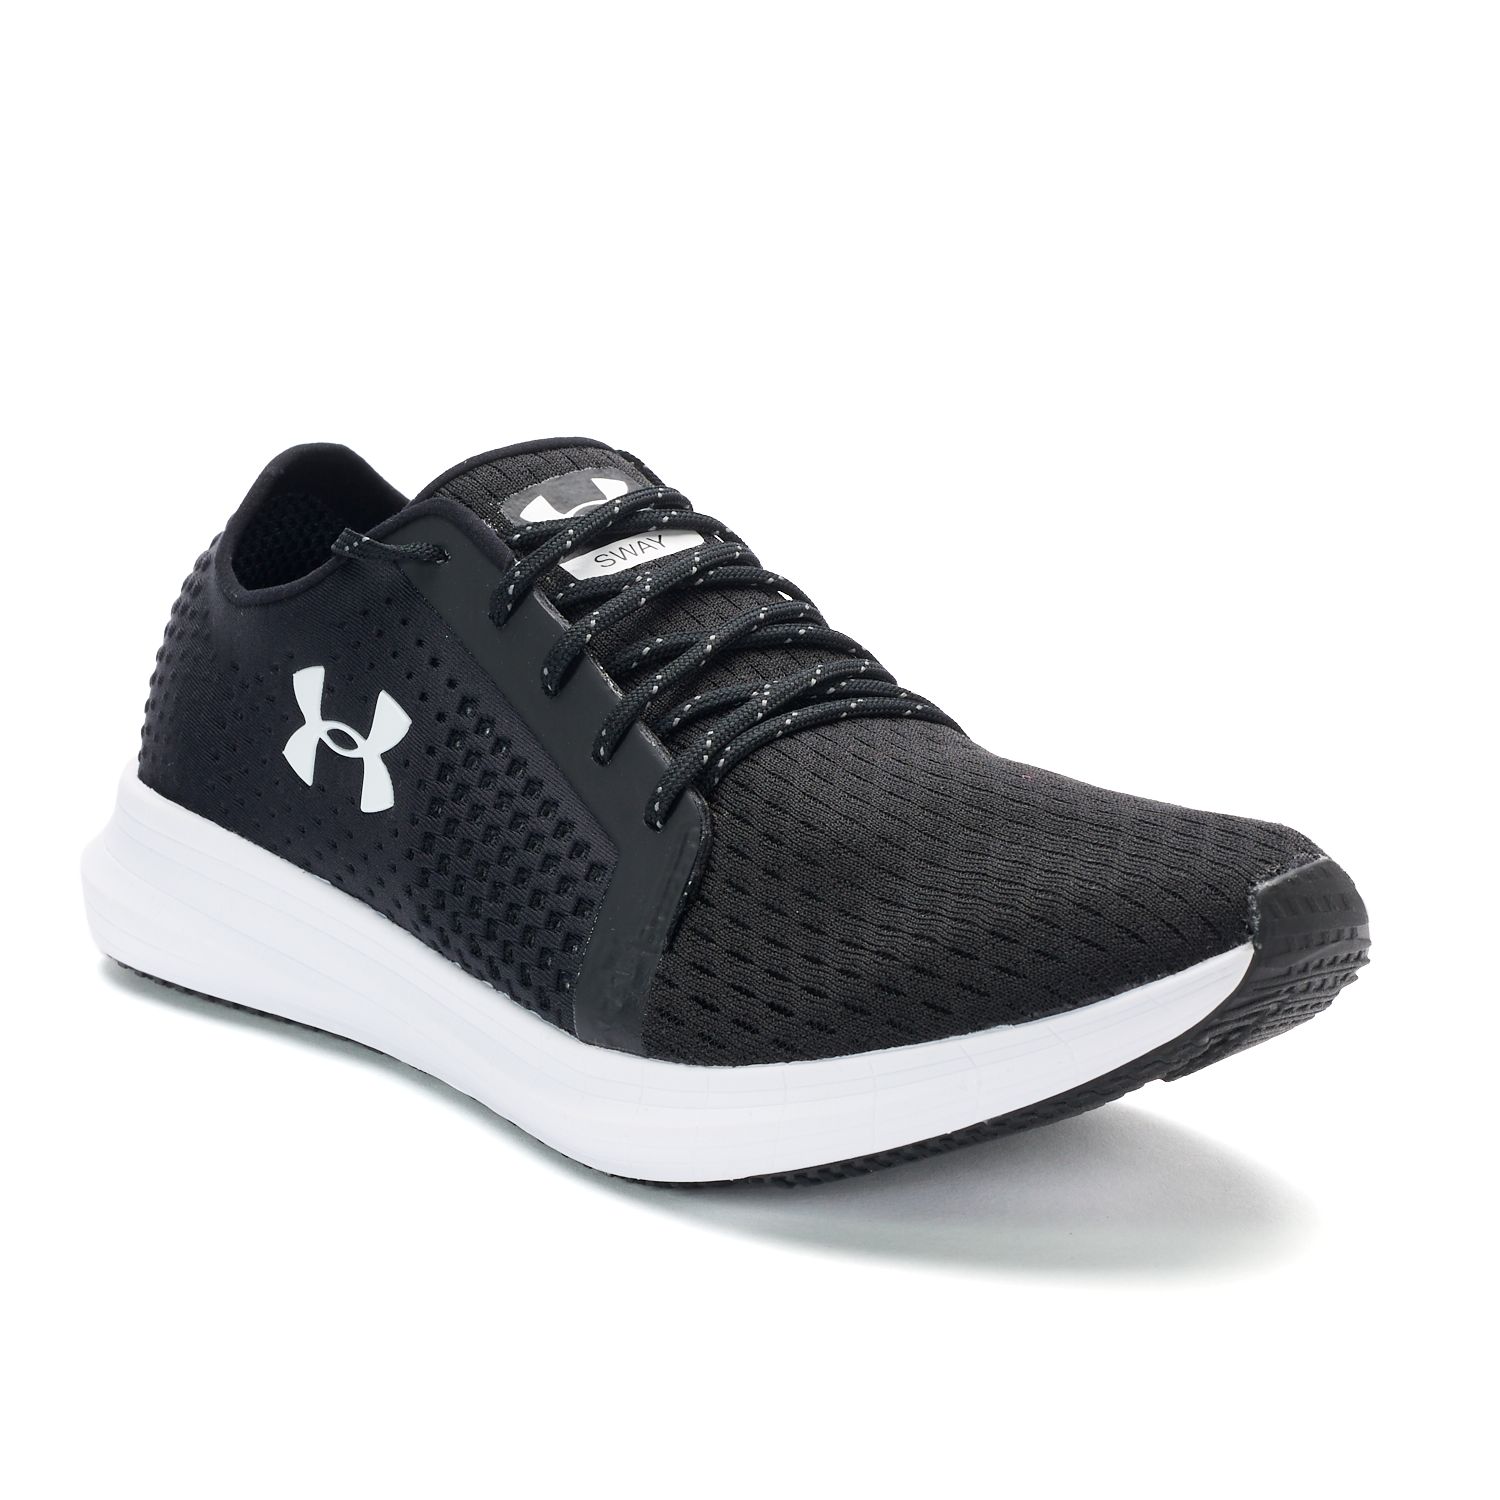 Under Armour Sway Women's Running Shoes